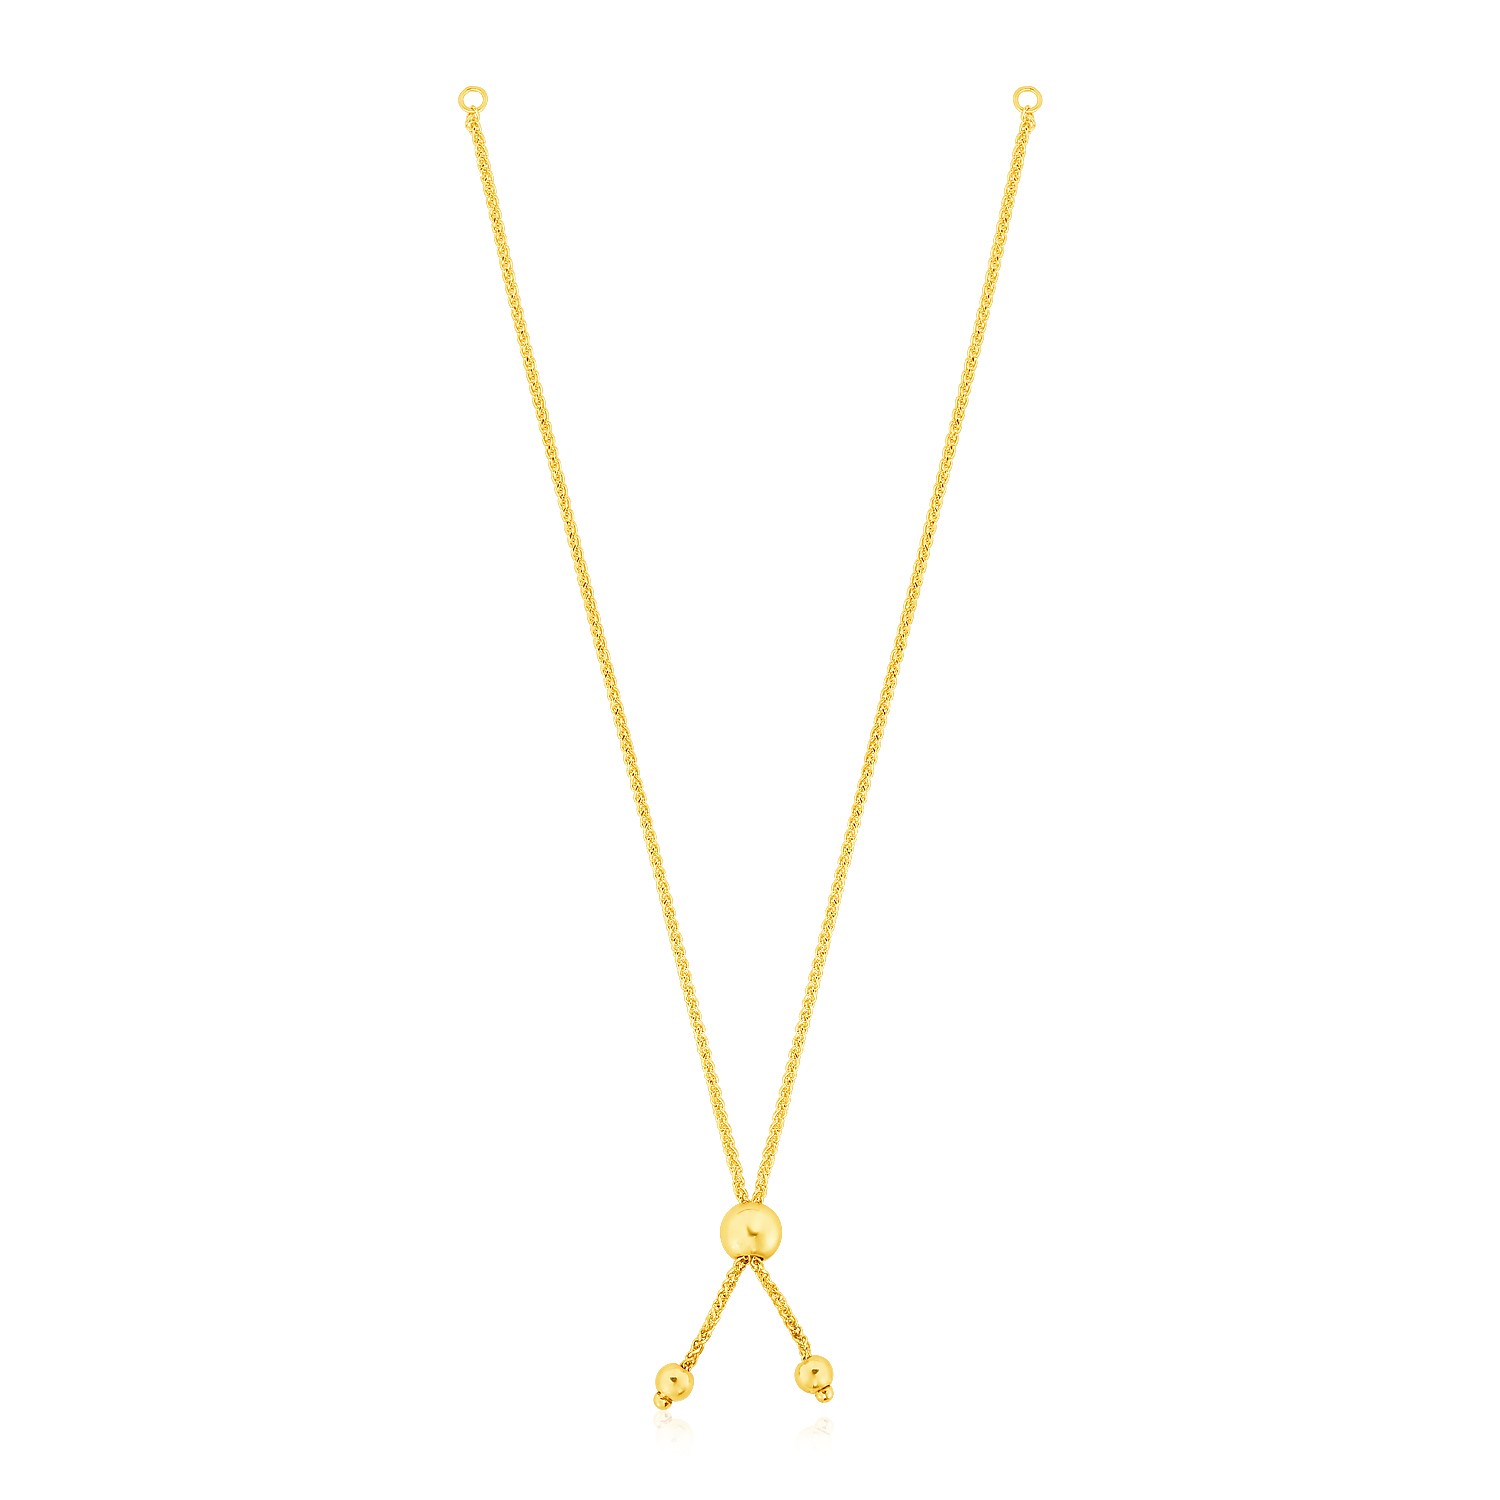 14k Yellow Gold 8 inch Adjustable Friendship Bracelet Chain with Ball Slide